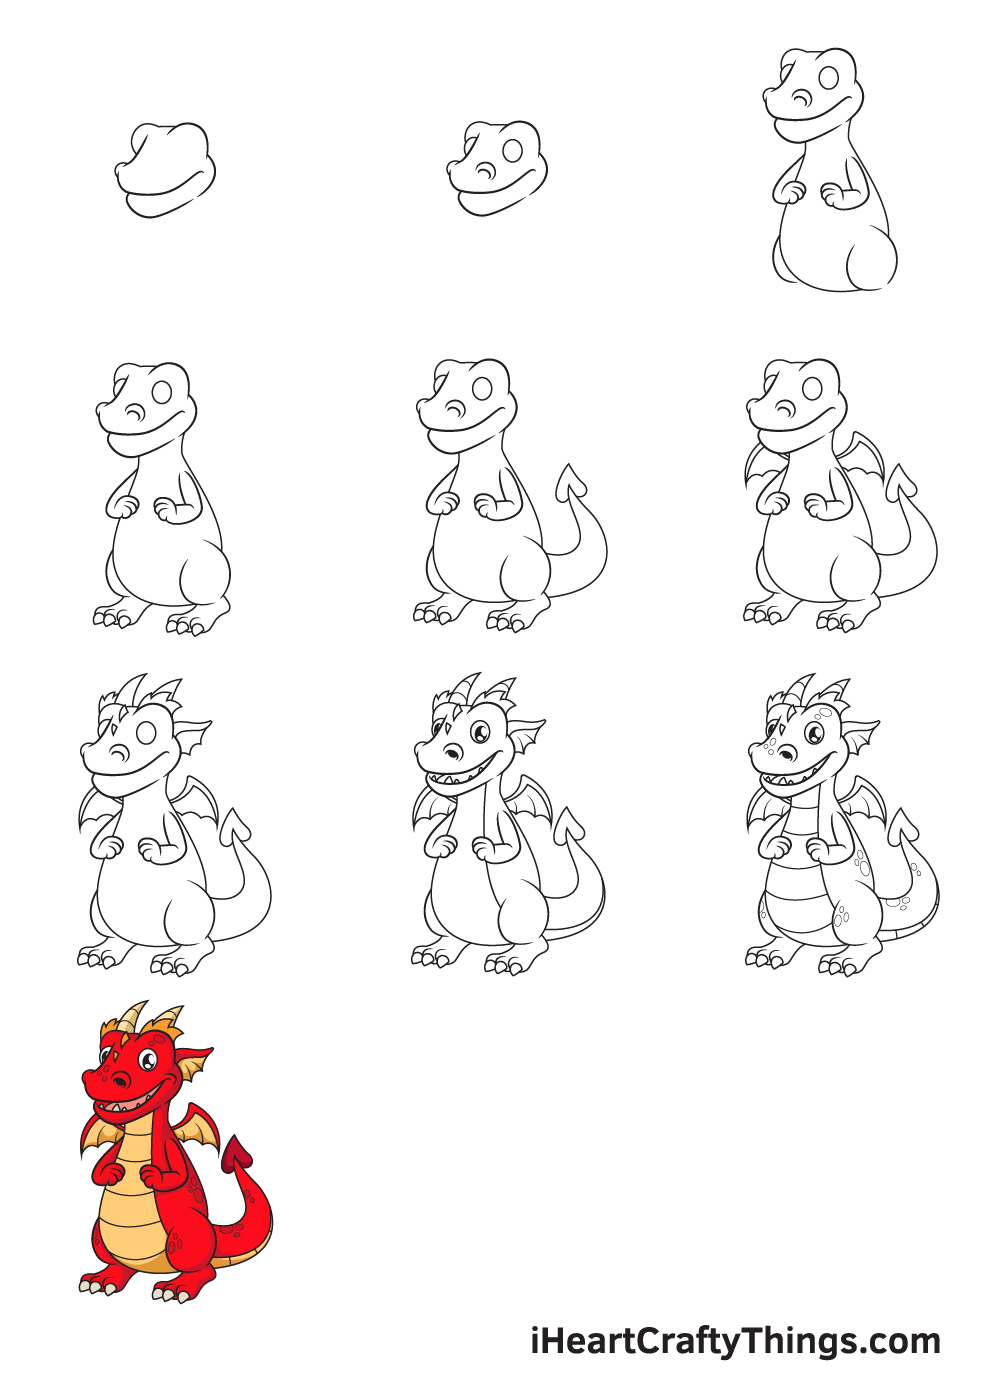 Drawing Dragon in 9 Easy Steps